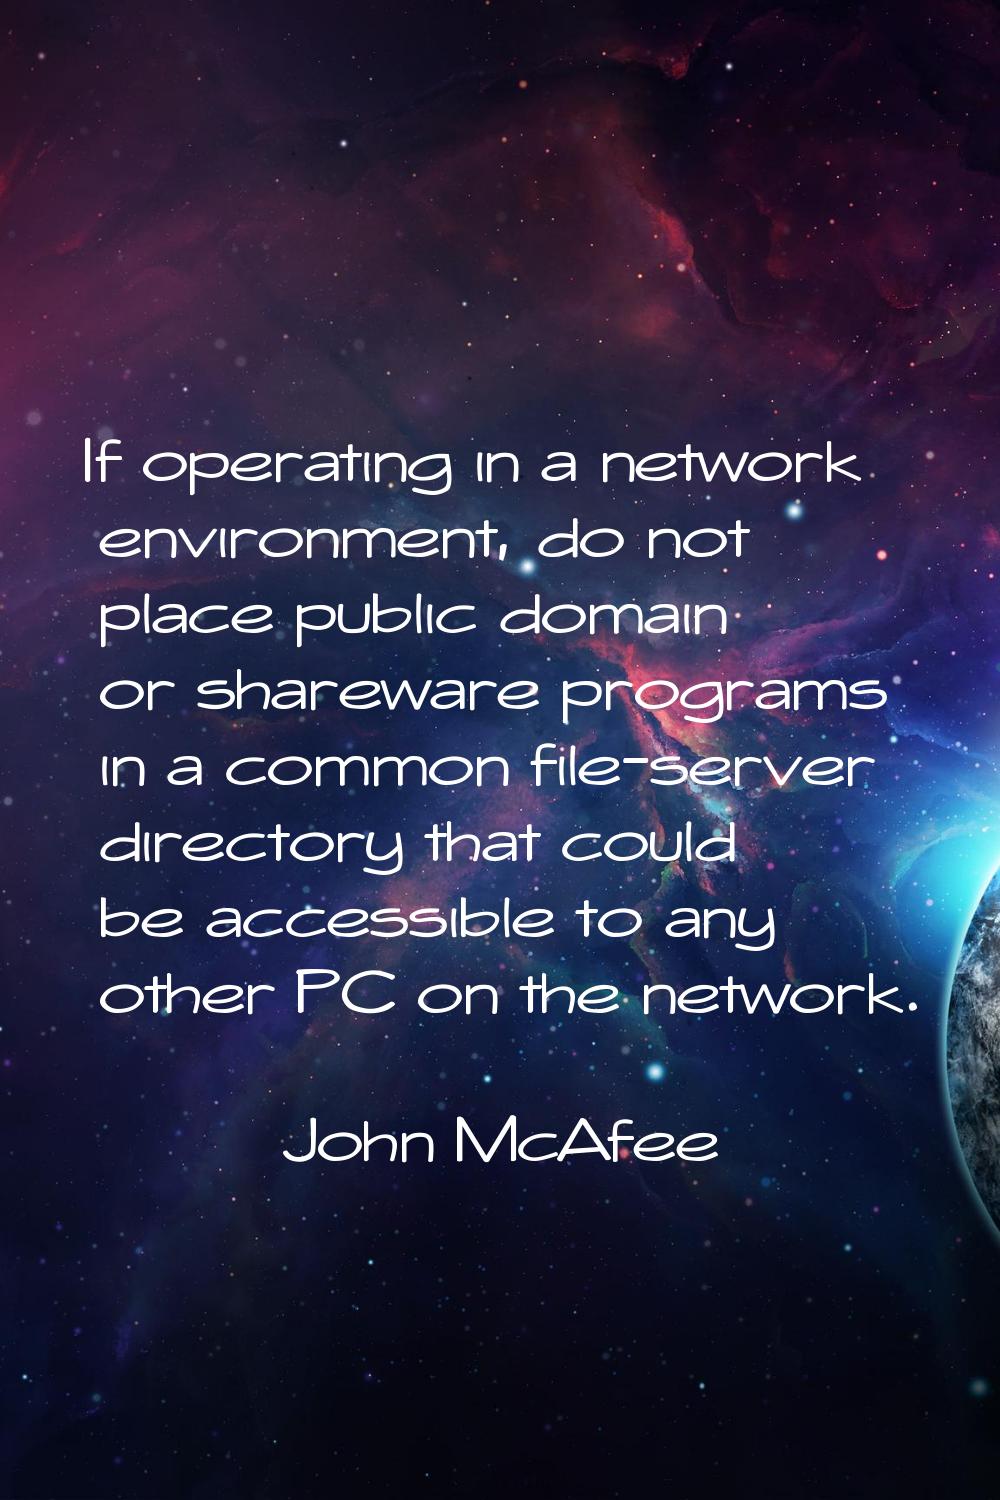 If operating in a network environment, do not place public domain or shareware programs in a common